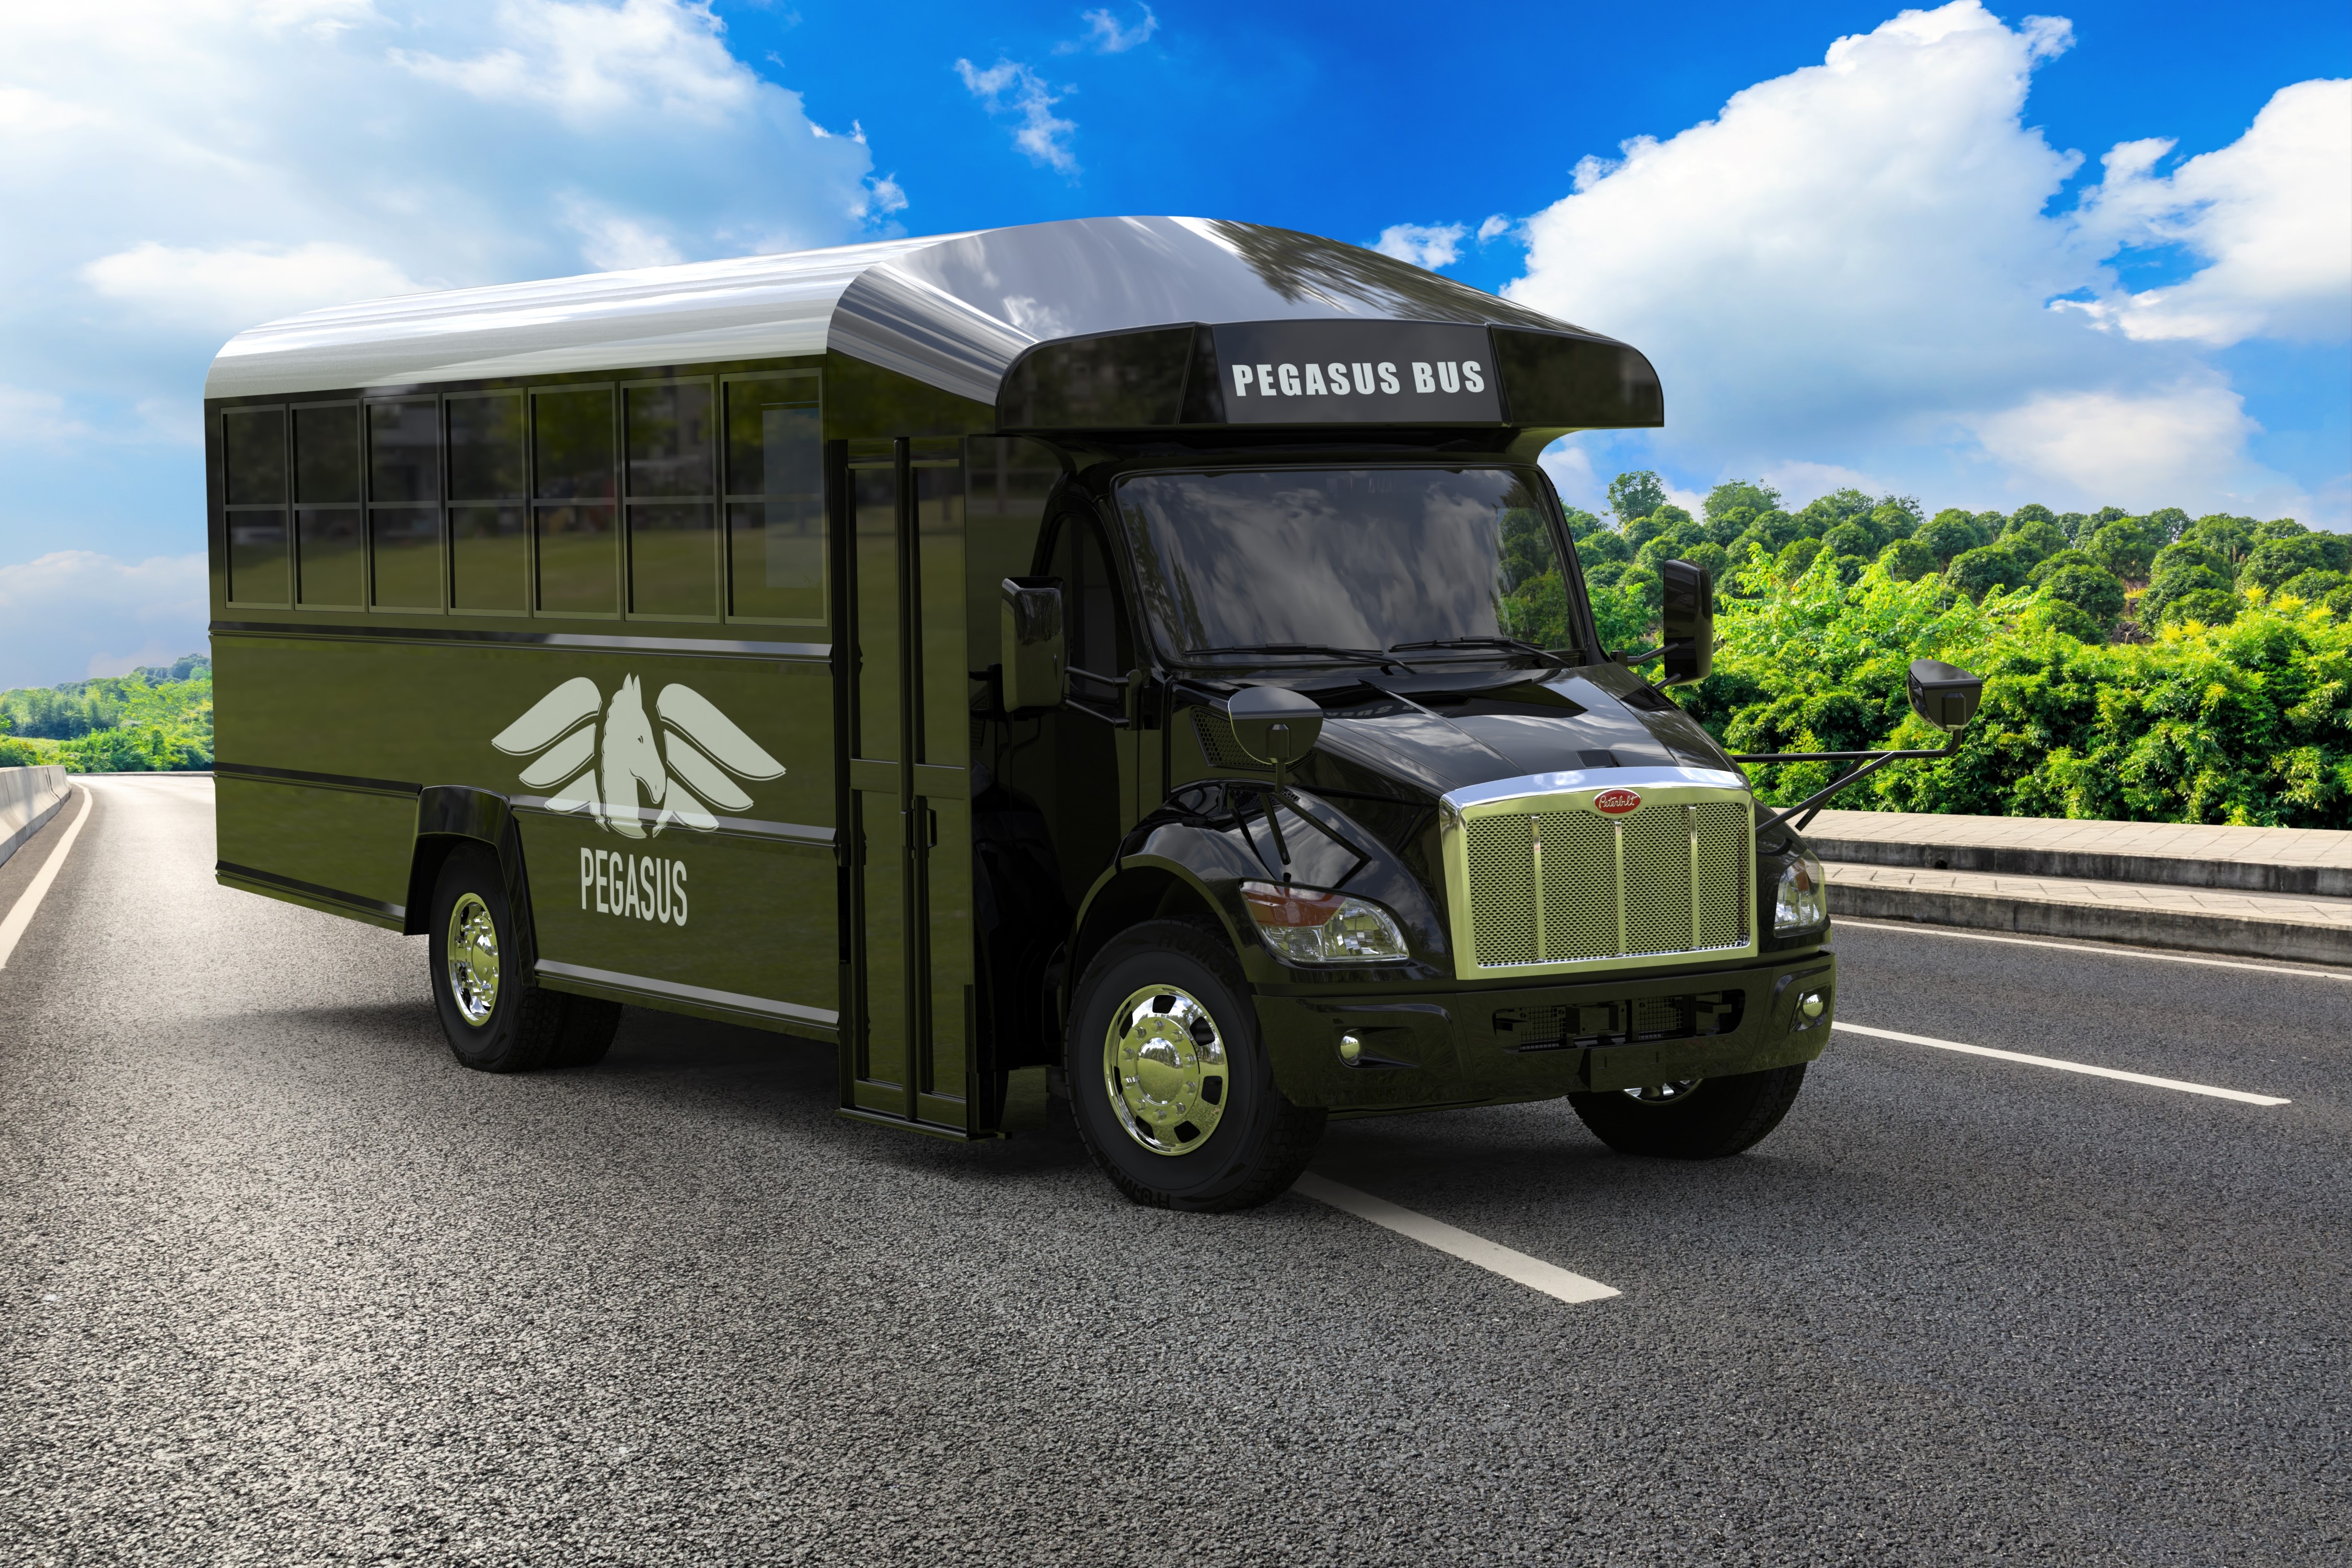 Pegasus also recently announced details of a newly penned agreement with the nationu2019s largest bus dealership, Creative Bus Sales.